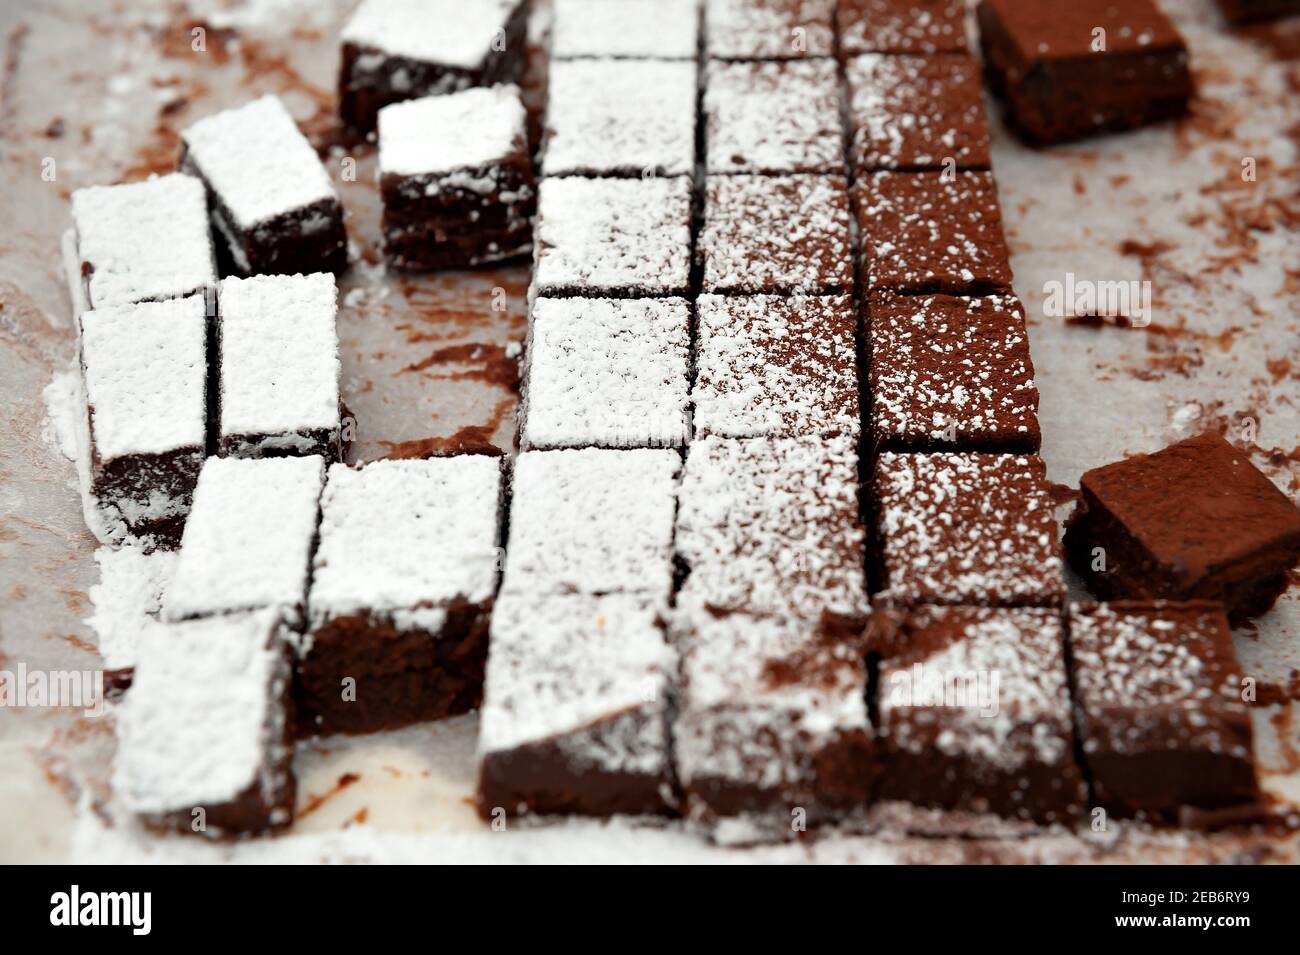 Delicious homemade raw chocolates cut into square shapes sprinkled with powdered sugar. Valentines Day celebration. Stock Photo